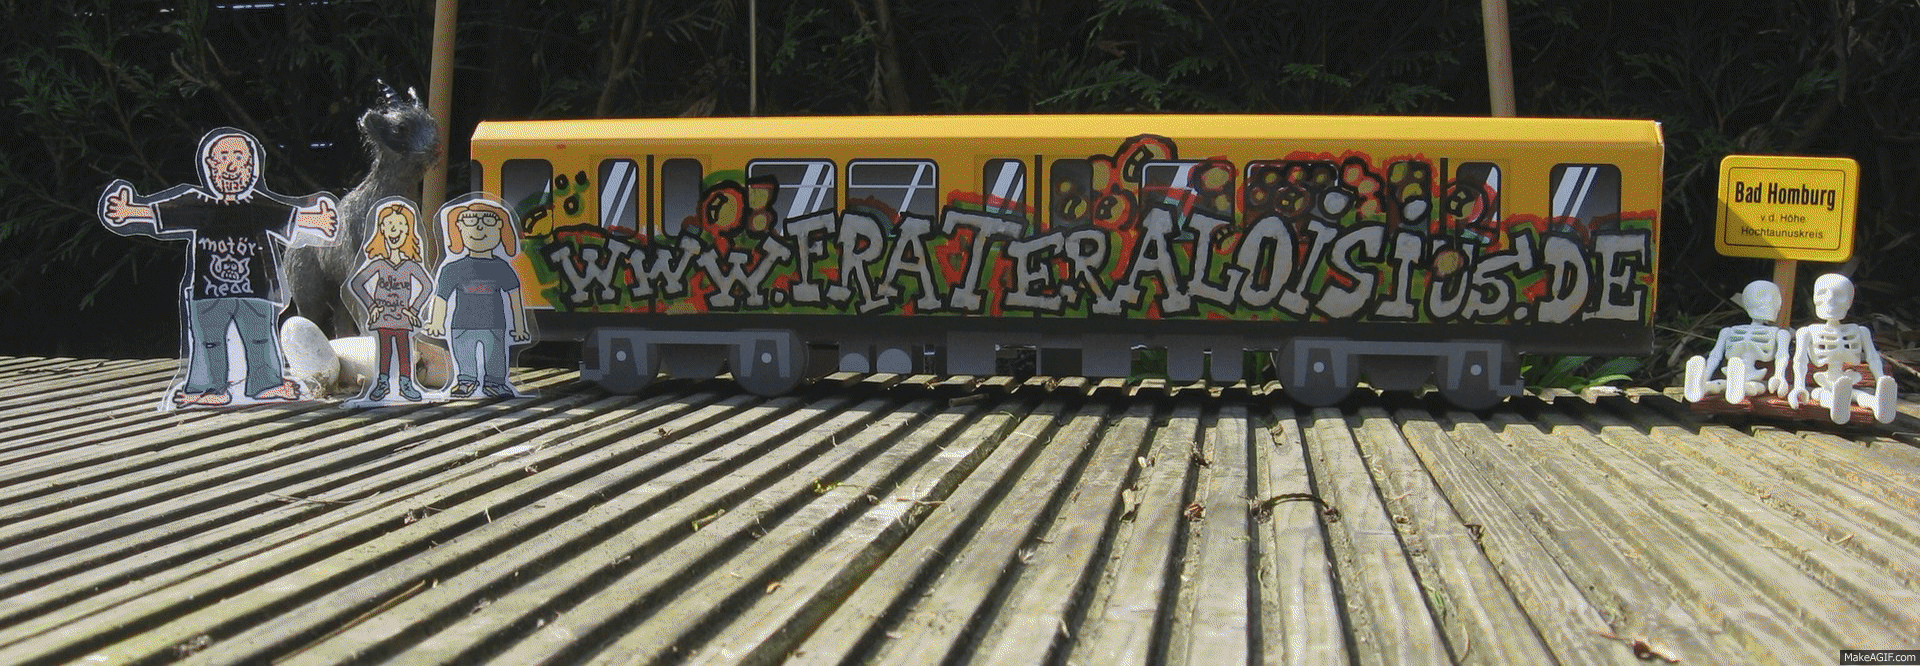 street_art_by_frater_aloisius als gif